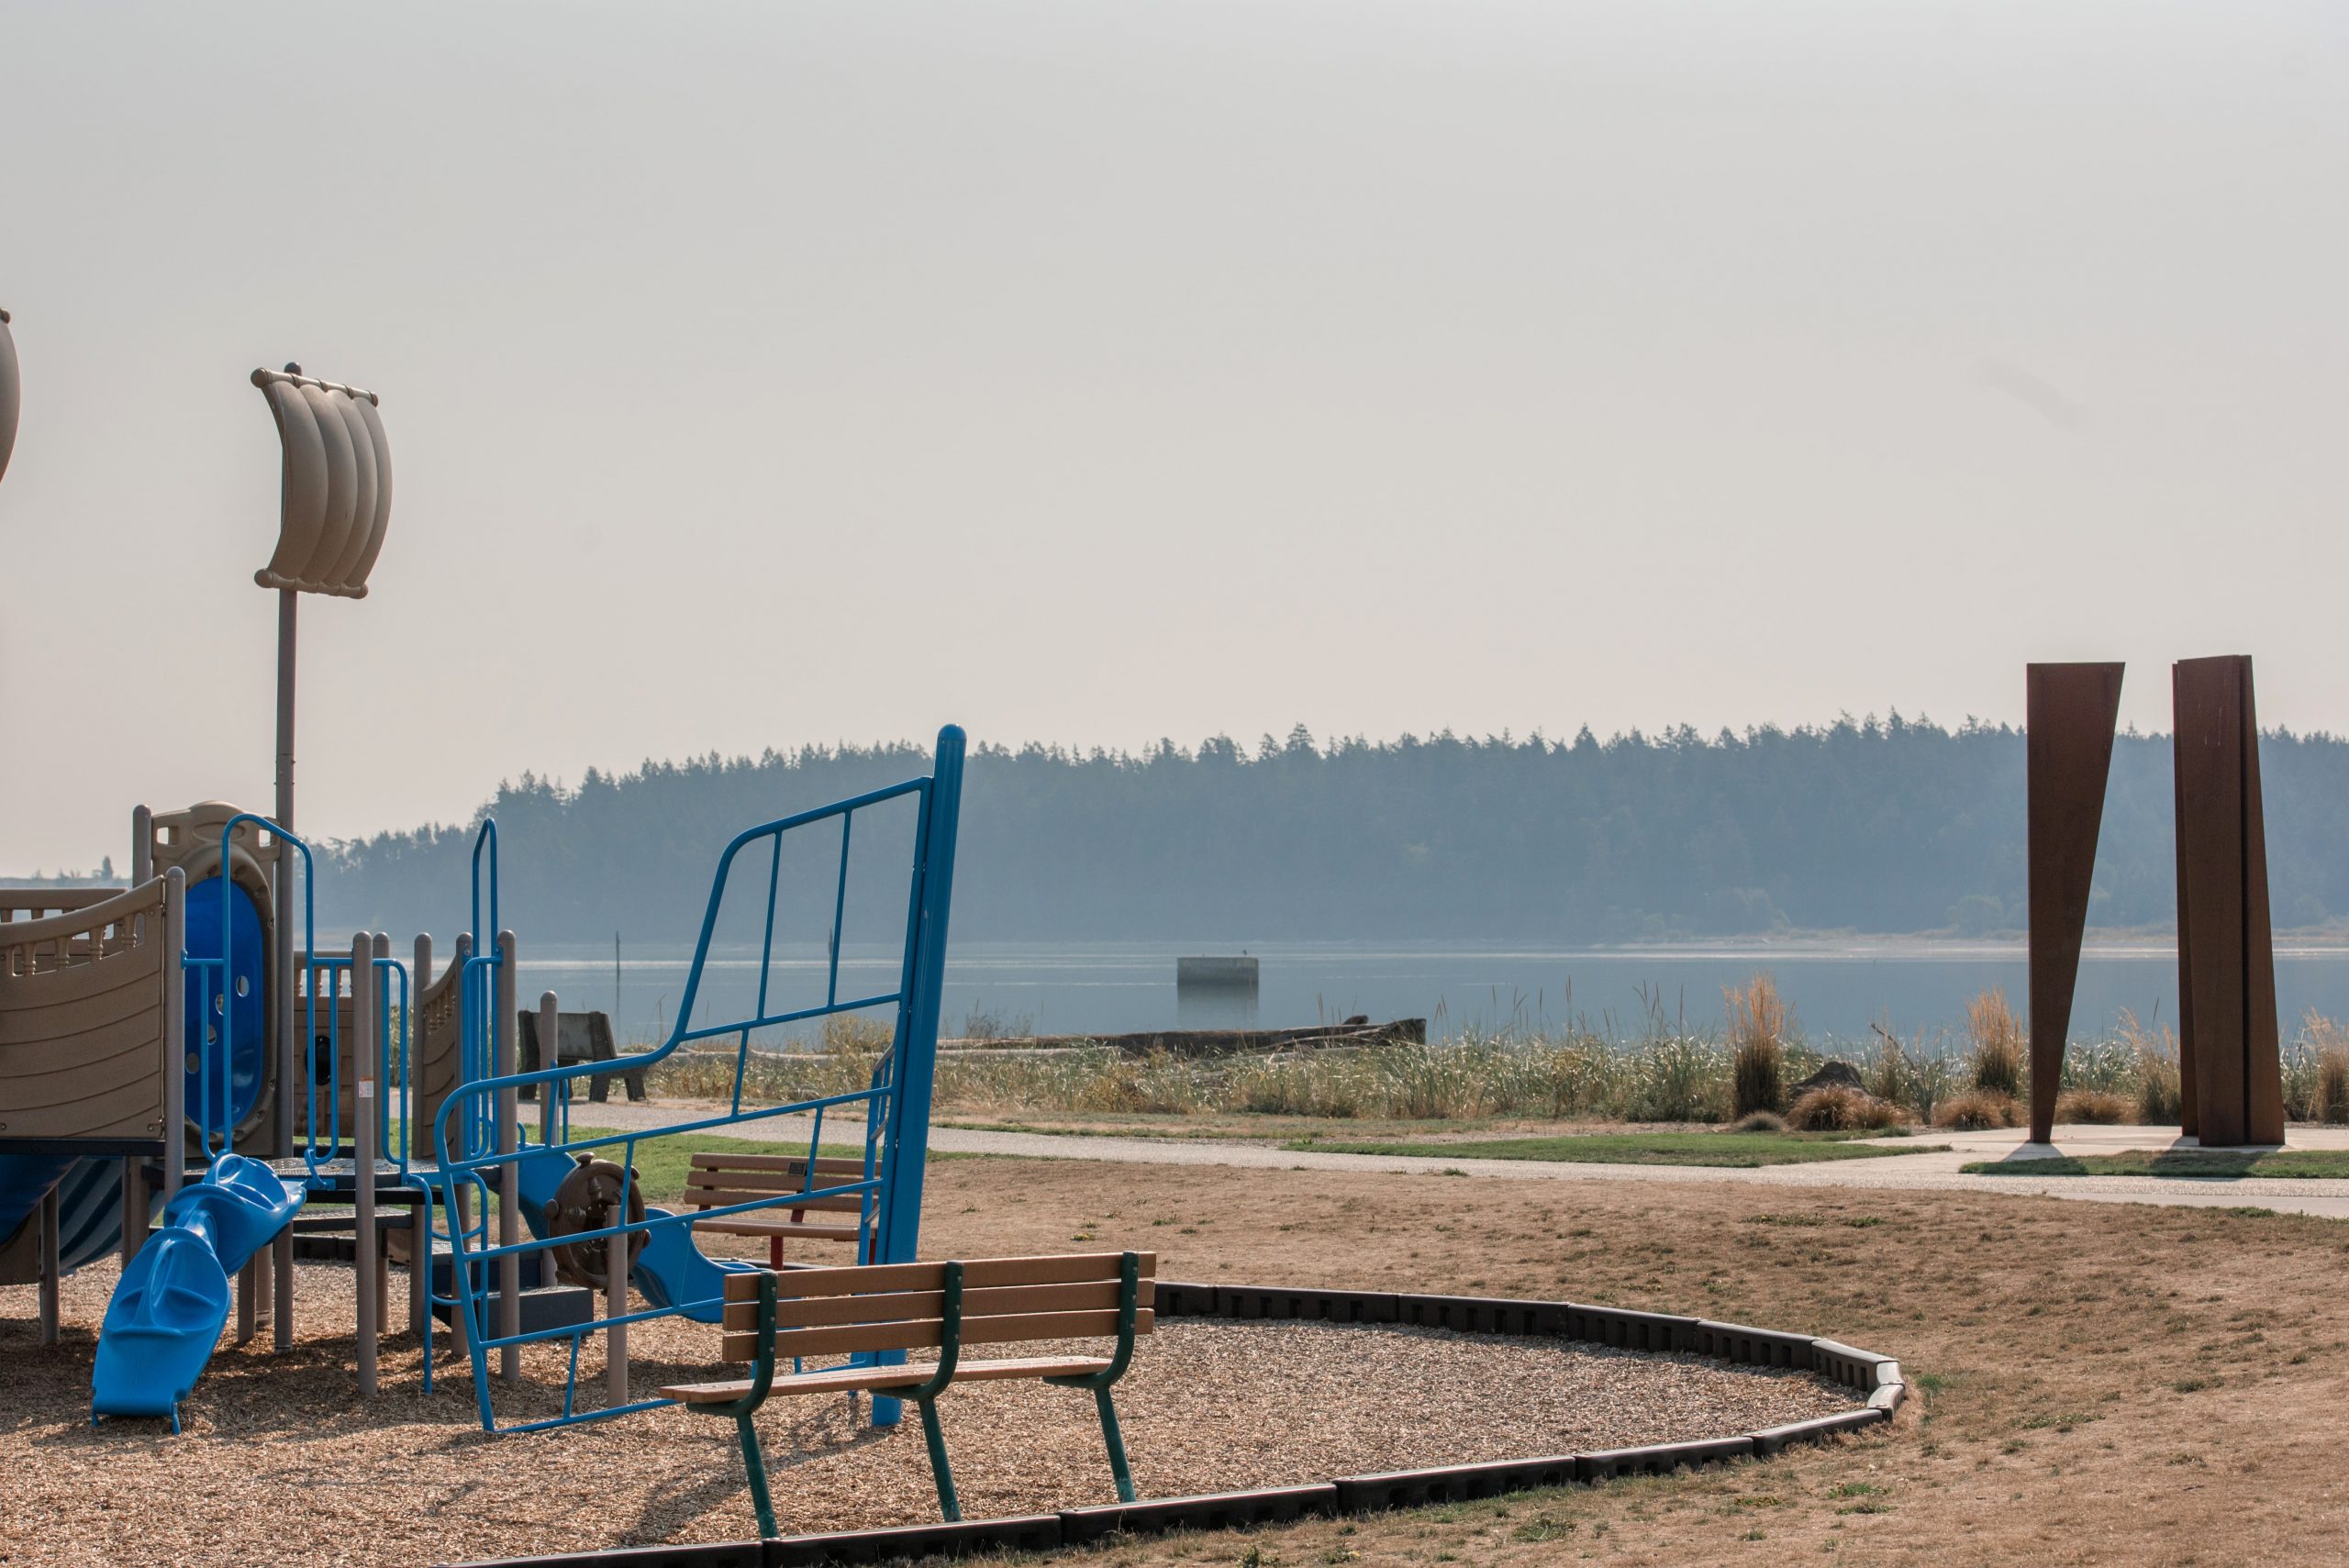 Windjammer Park, City Beach, Playground, City of Oak Harbor, Whidbey Island, Washington, Things to do, outdoor fun